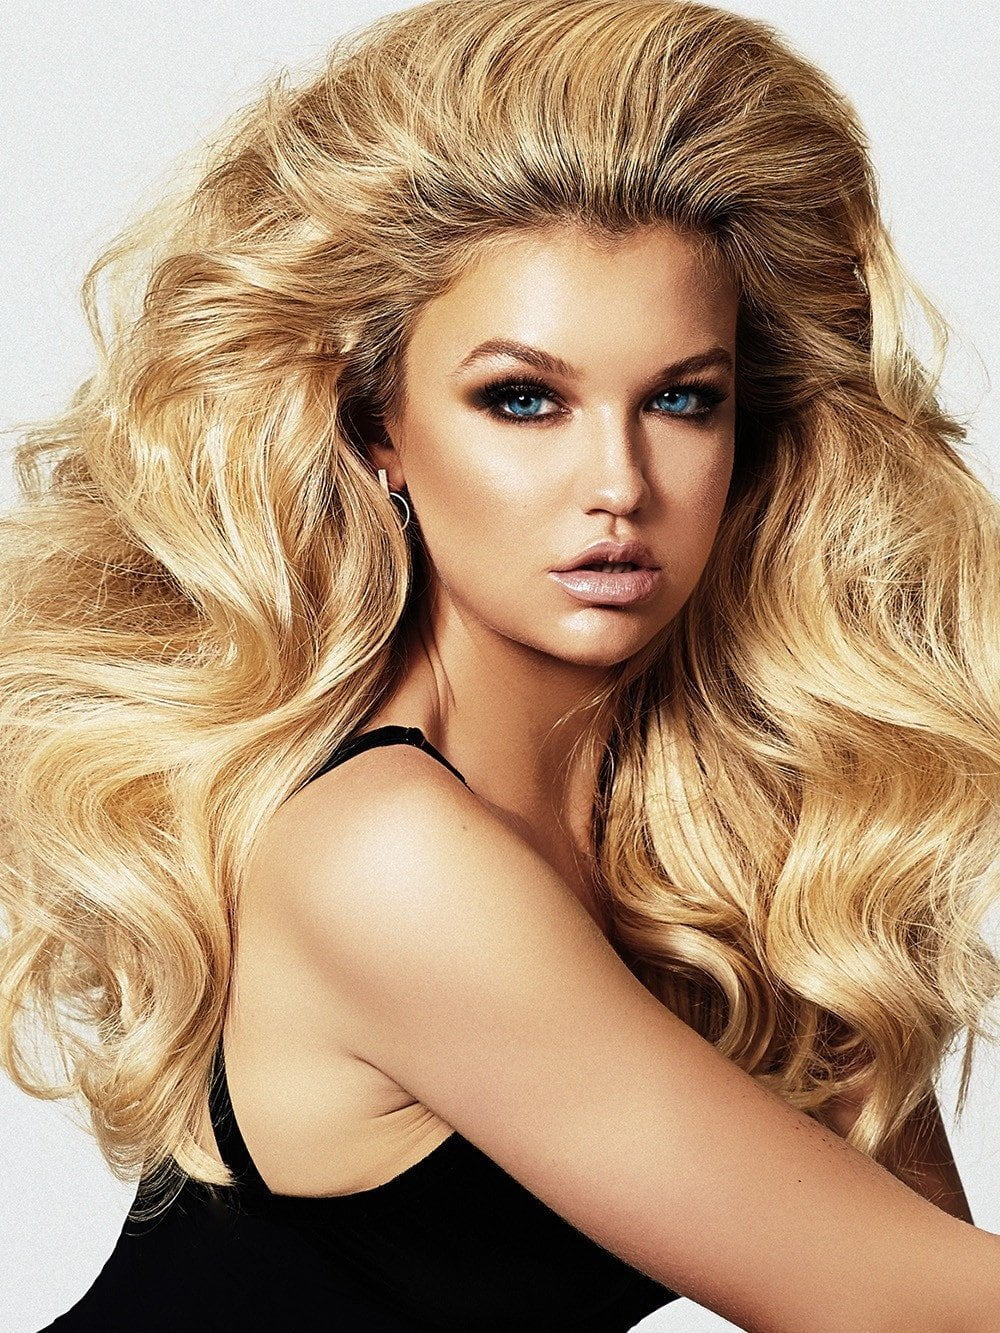 A do-it-yourself solution to achieve sexy bombshell hair at home